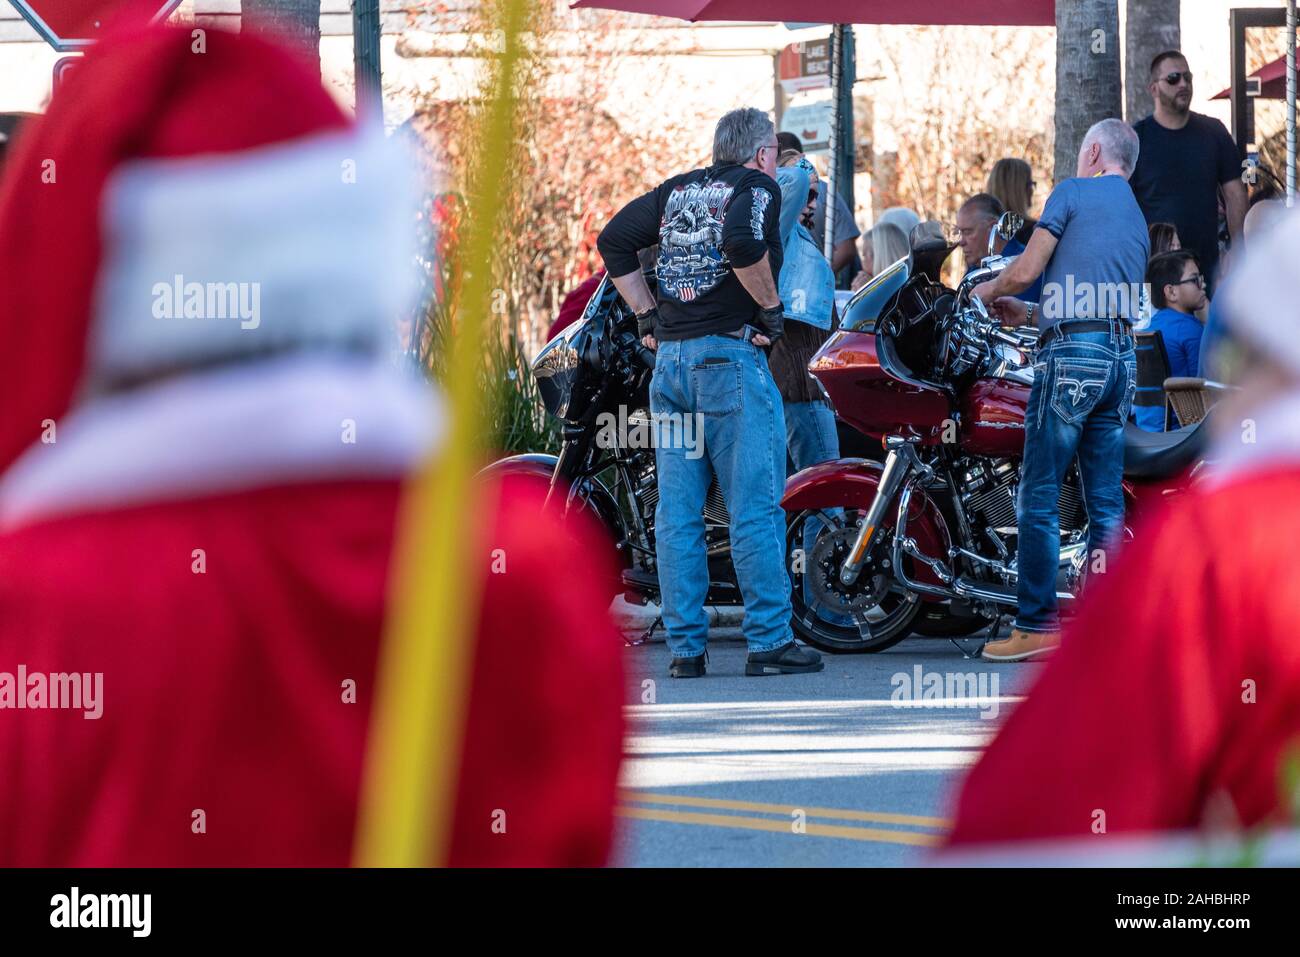 Christmastime in Mount Dora, Florida with Mr. and Mrs. Santa Claus, along with senior bikers and their Harley-Davidson motorcycles. (USA) Stock Photo